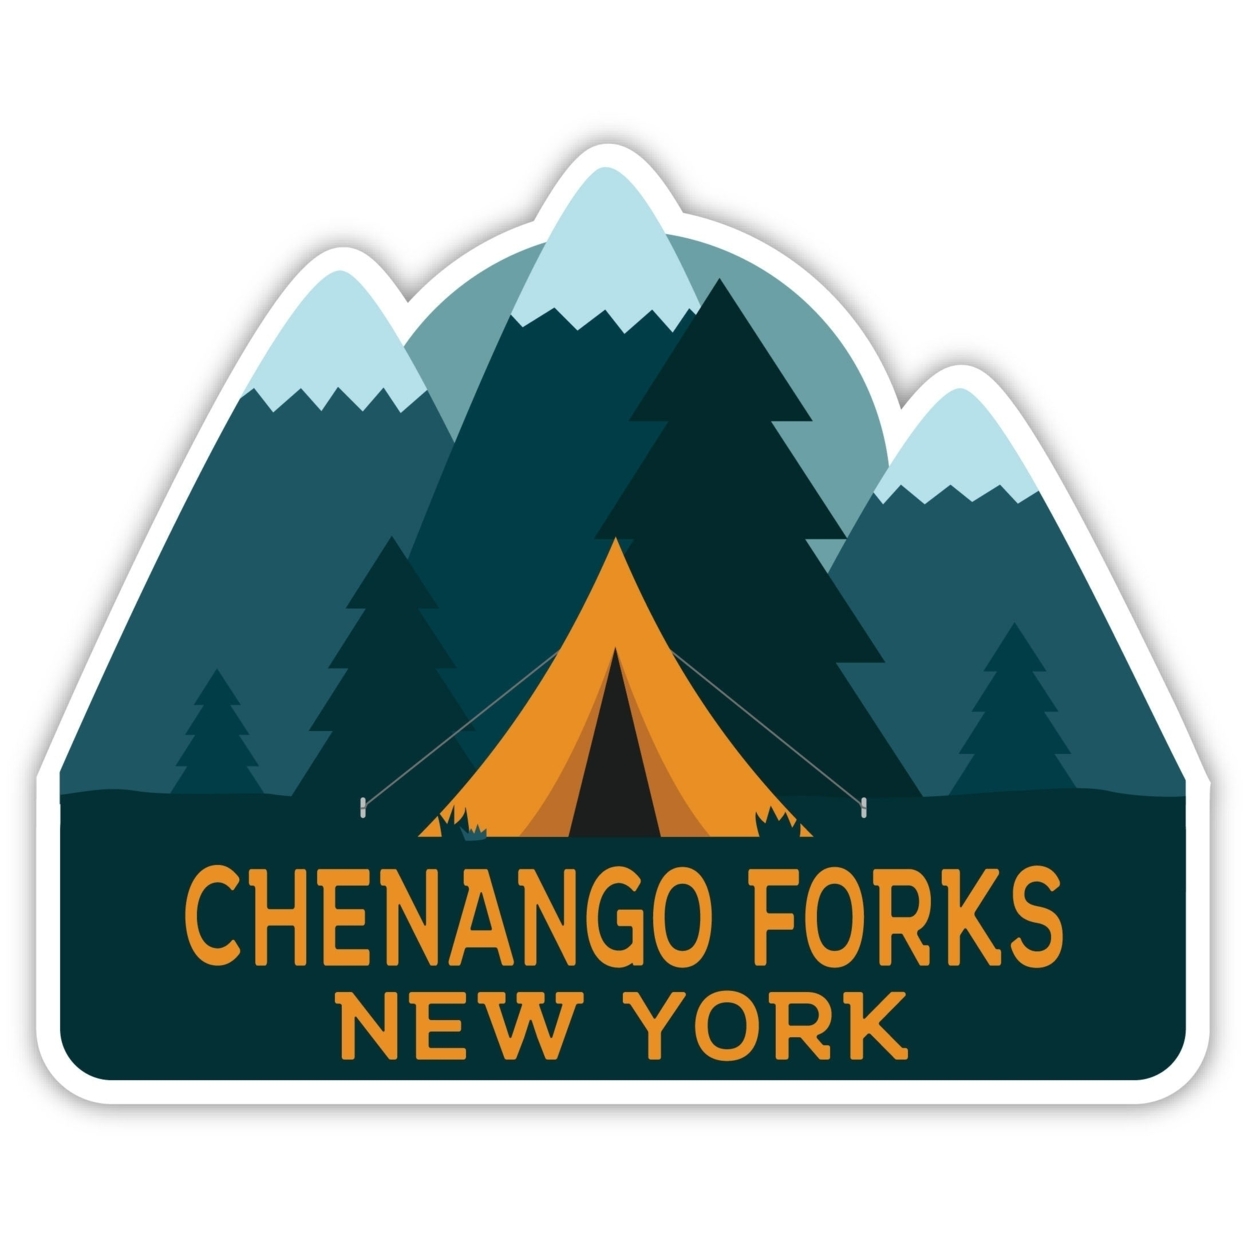 Chenango Forks New York Souvenir Decorative Stickers (Choose Theme And Size) - 4-Pack, 12-Inch, Tent